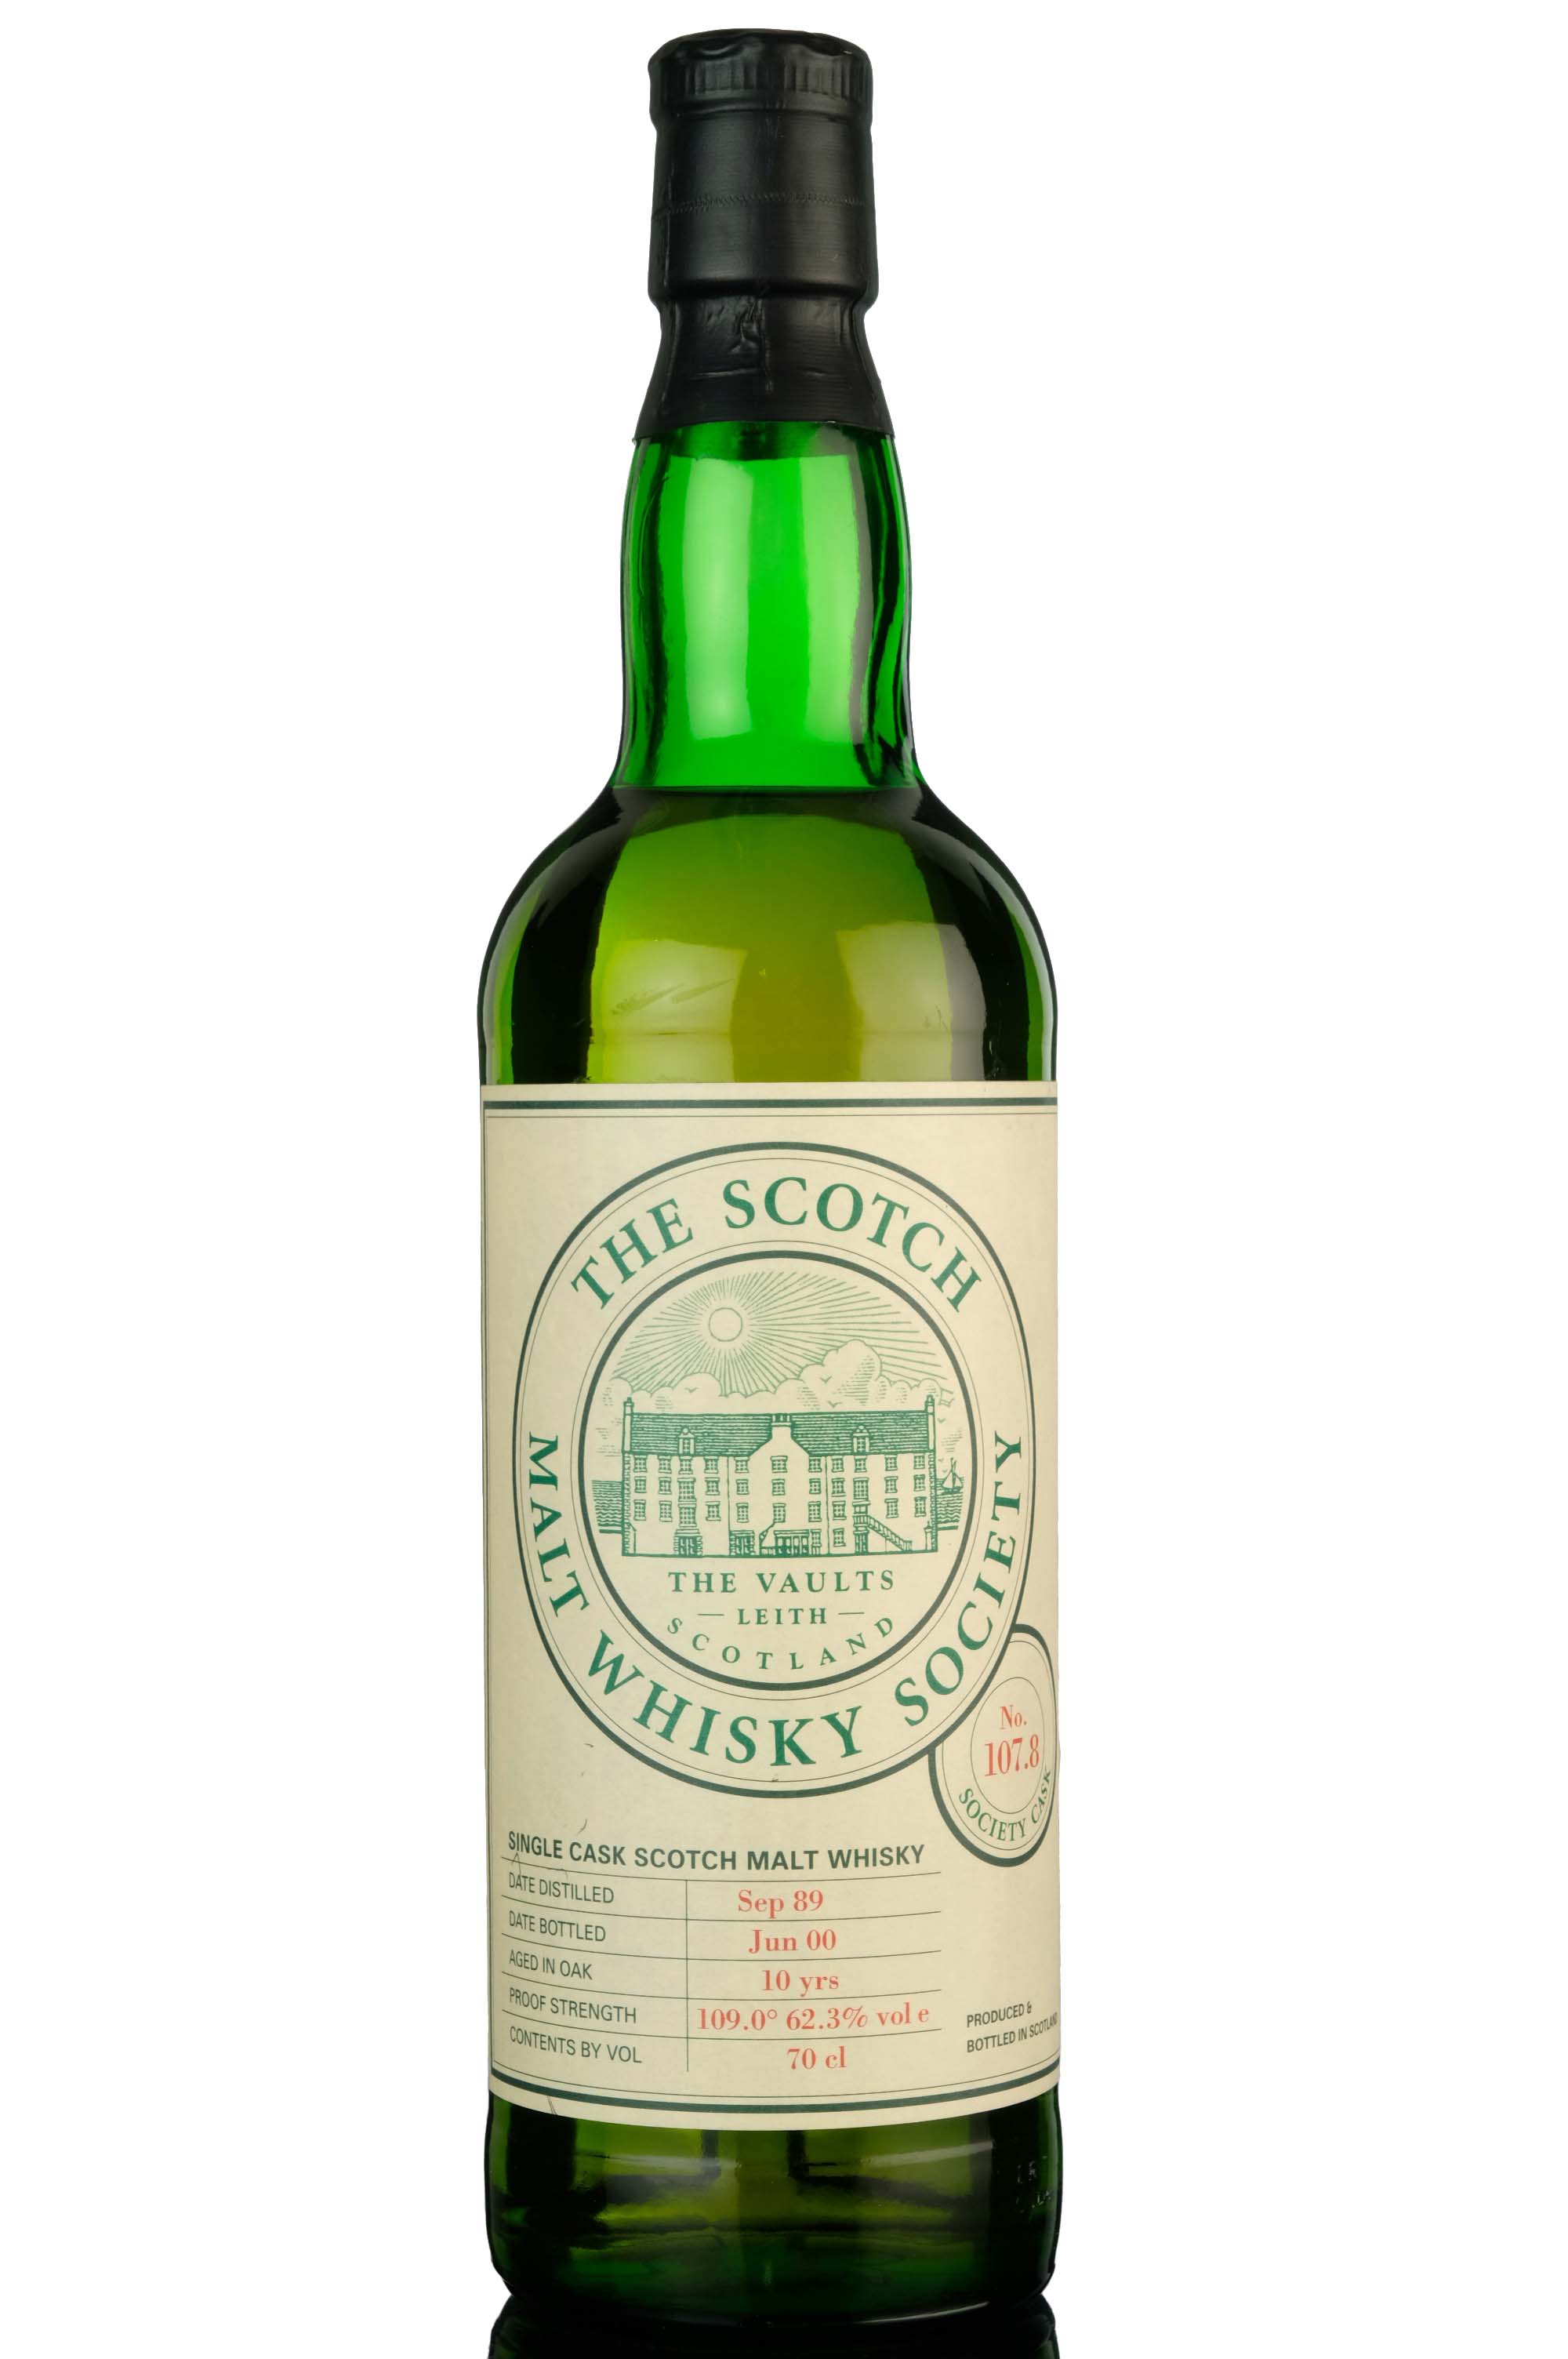 Glenallachie 1989-2000 - 10 Year Old - SMWS 107.8